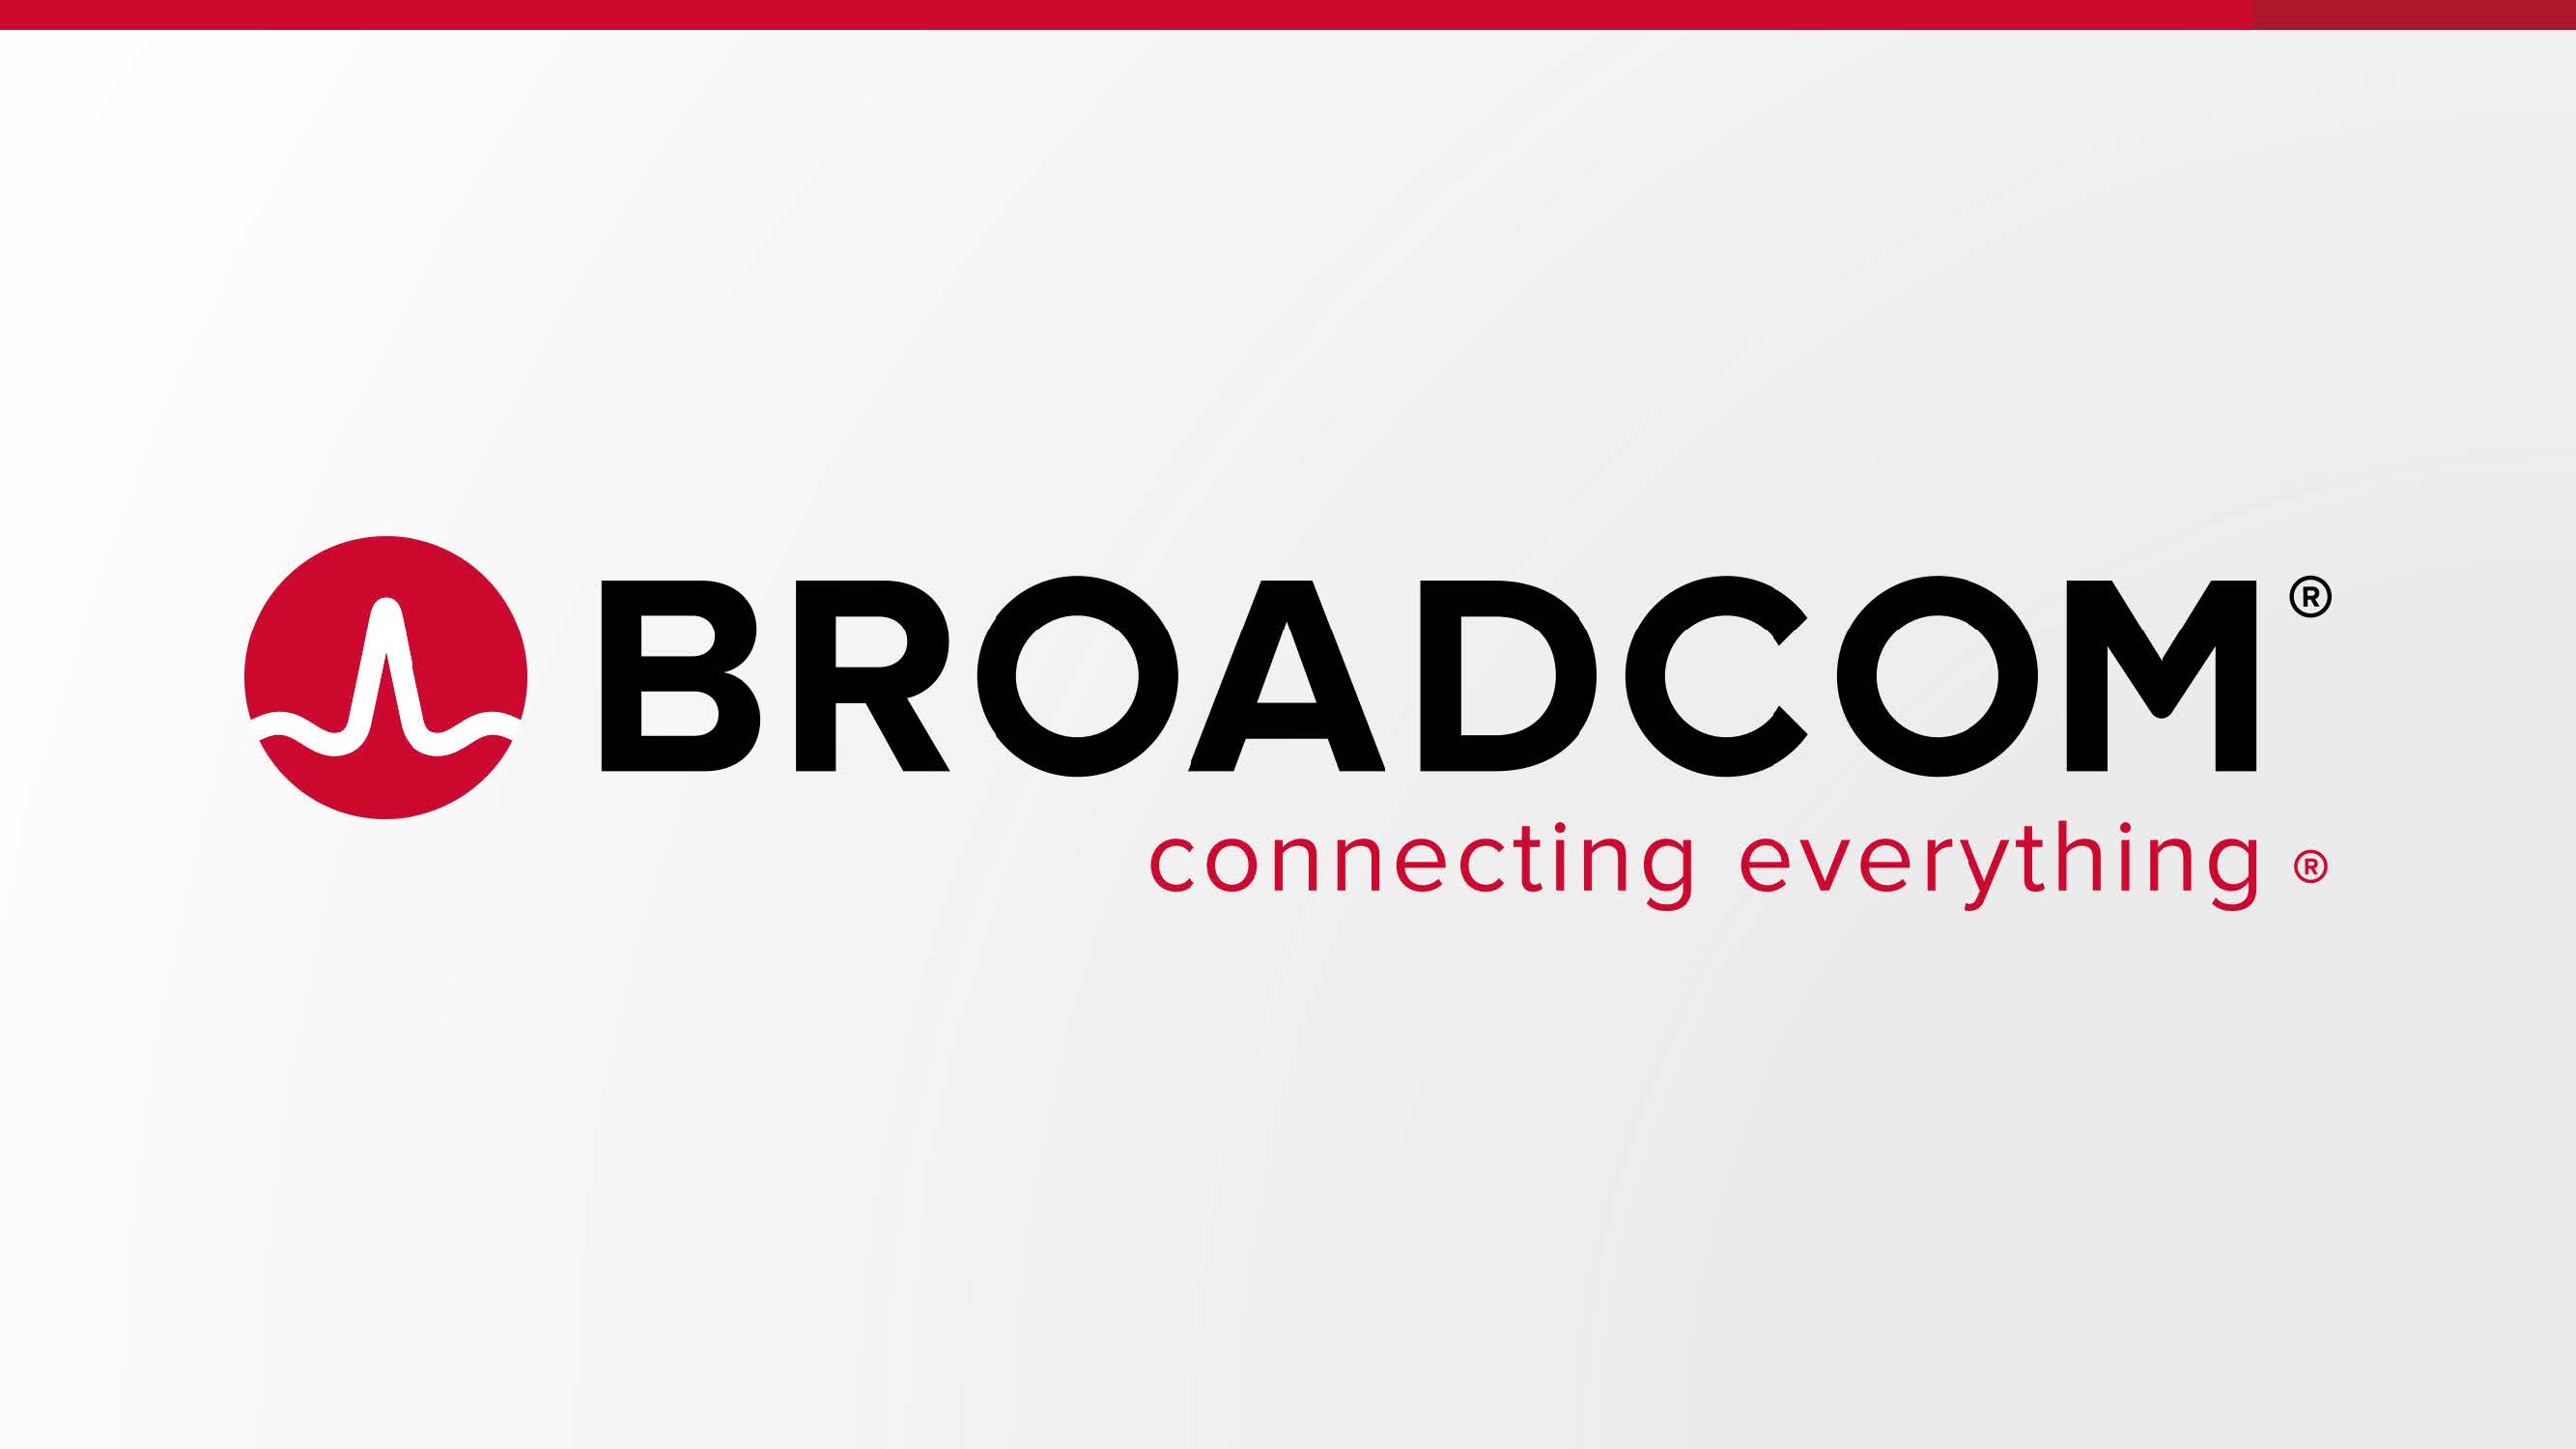 Broadcom Acquires Brocade in $5.9 Billion Deal in Yet Another Major Tech Acquisition This Year